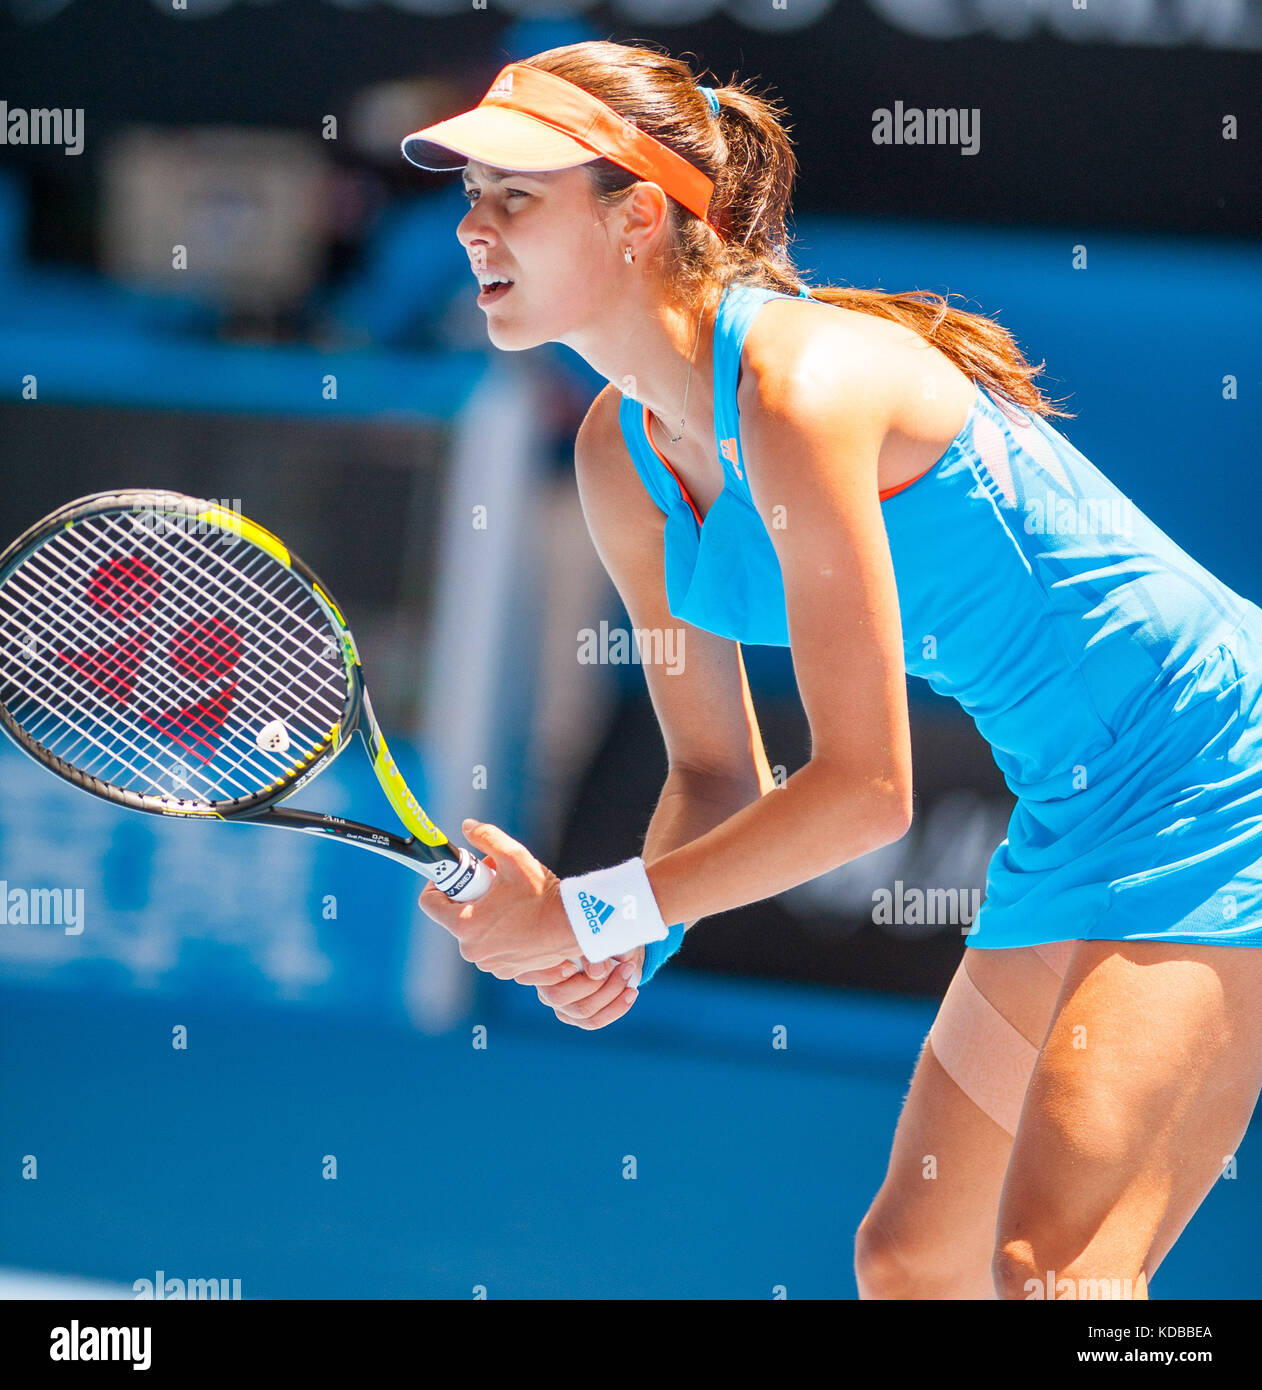 ANA IVANOVIC competes at the Australian Open. The Australian Open - a Grand Slam Tournament - is the opening event of the calendar annually Stock Photo - Alamy